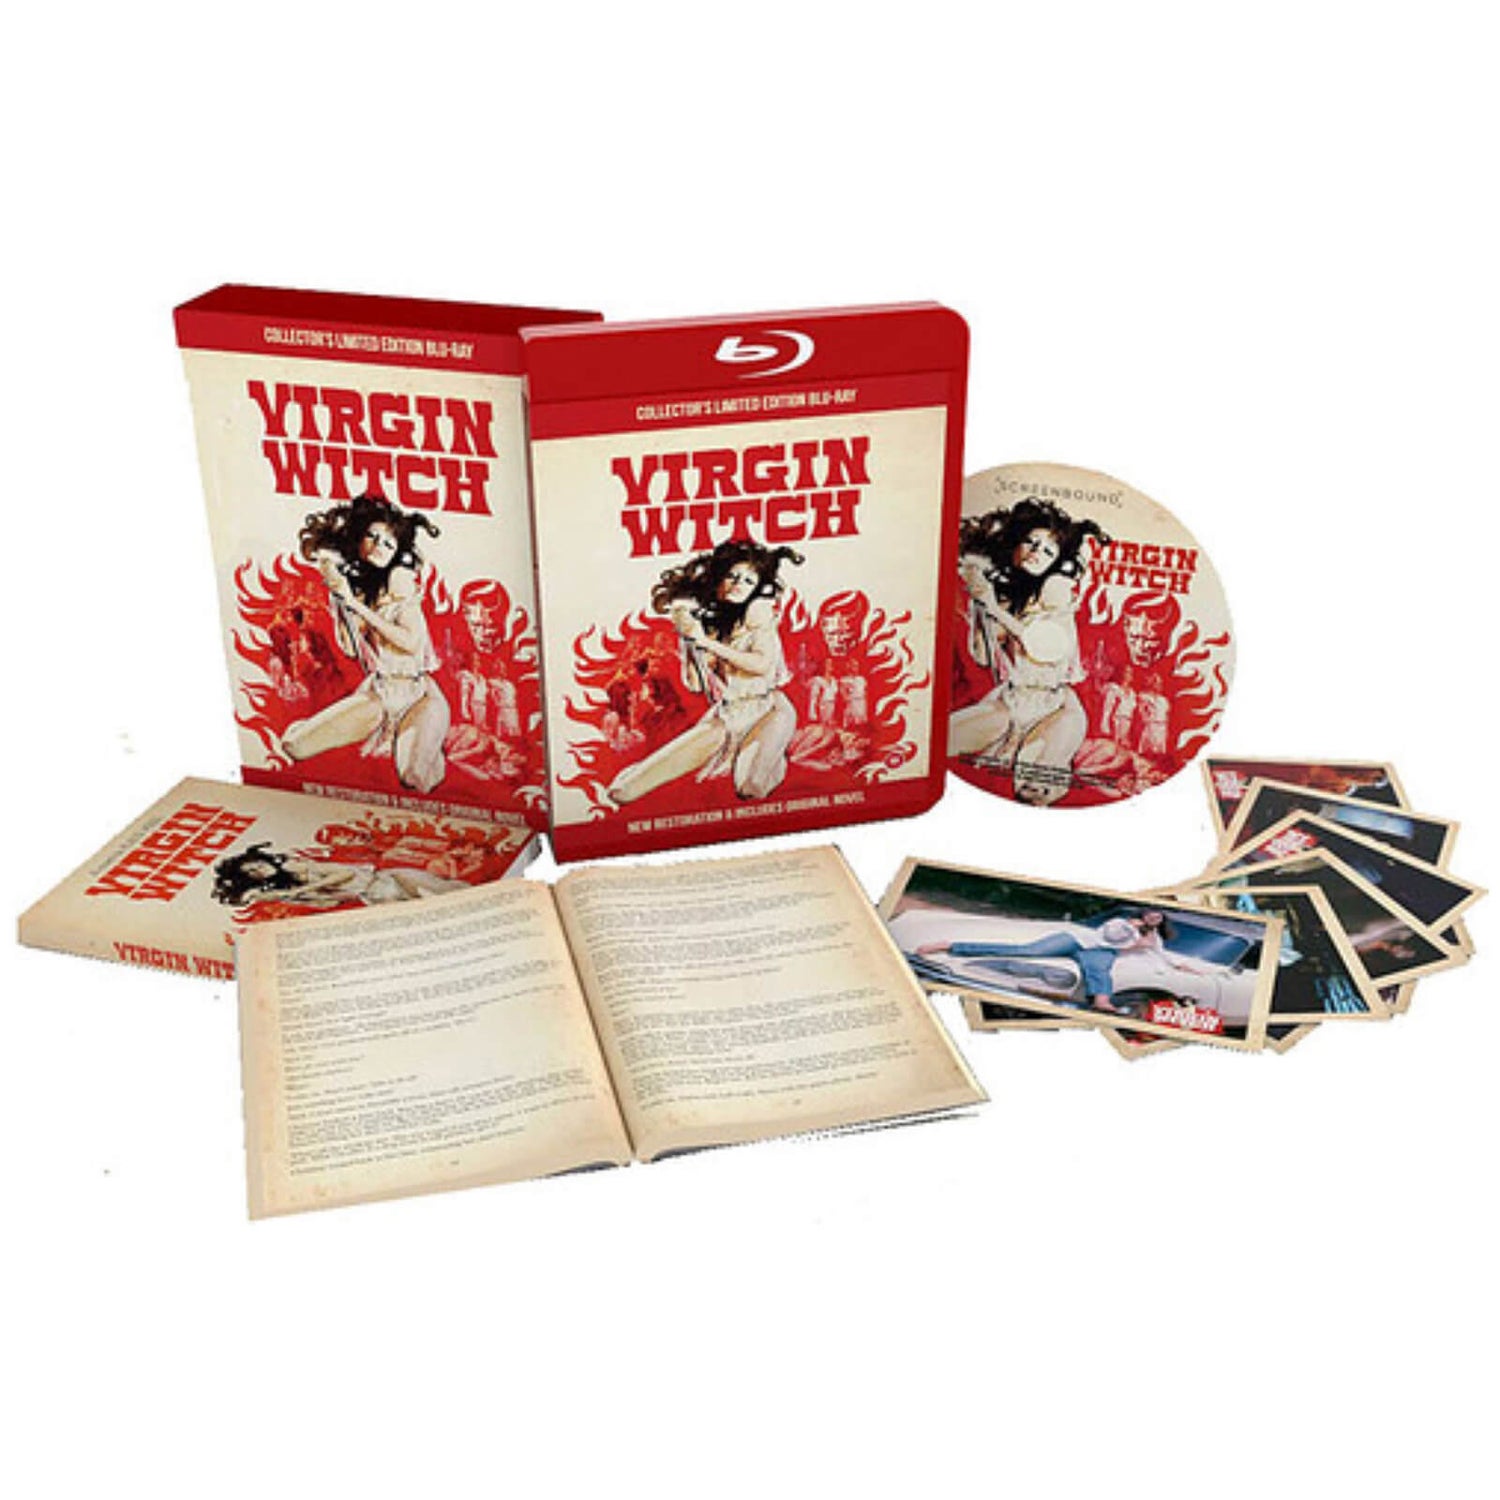 Virgin Witch - Collector's Limited Edition